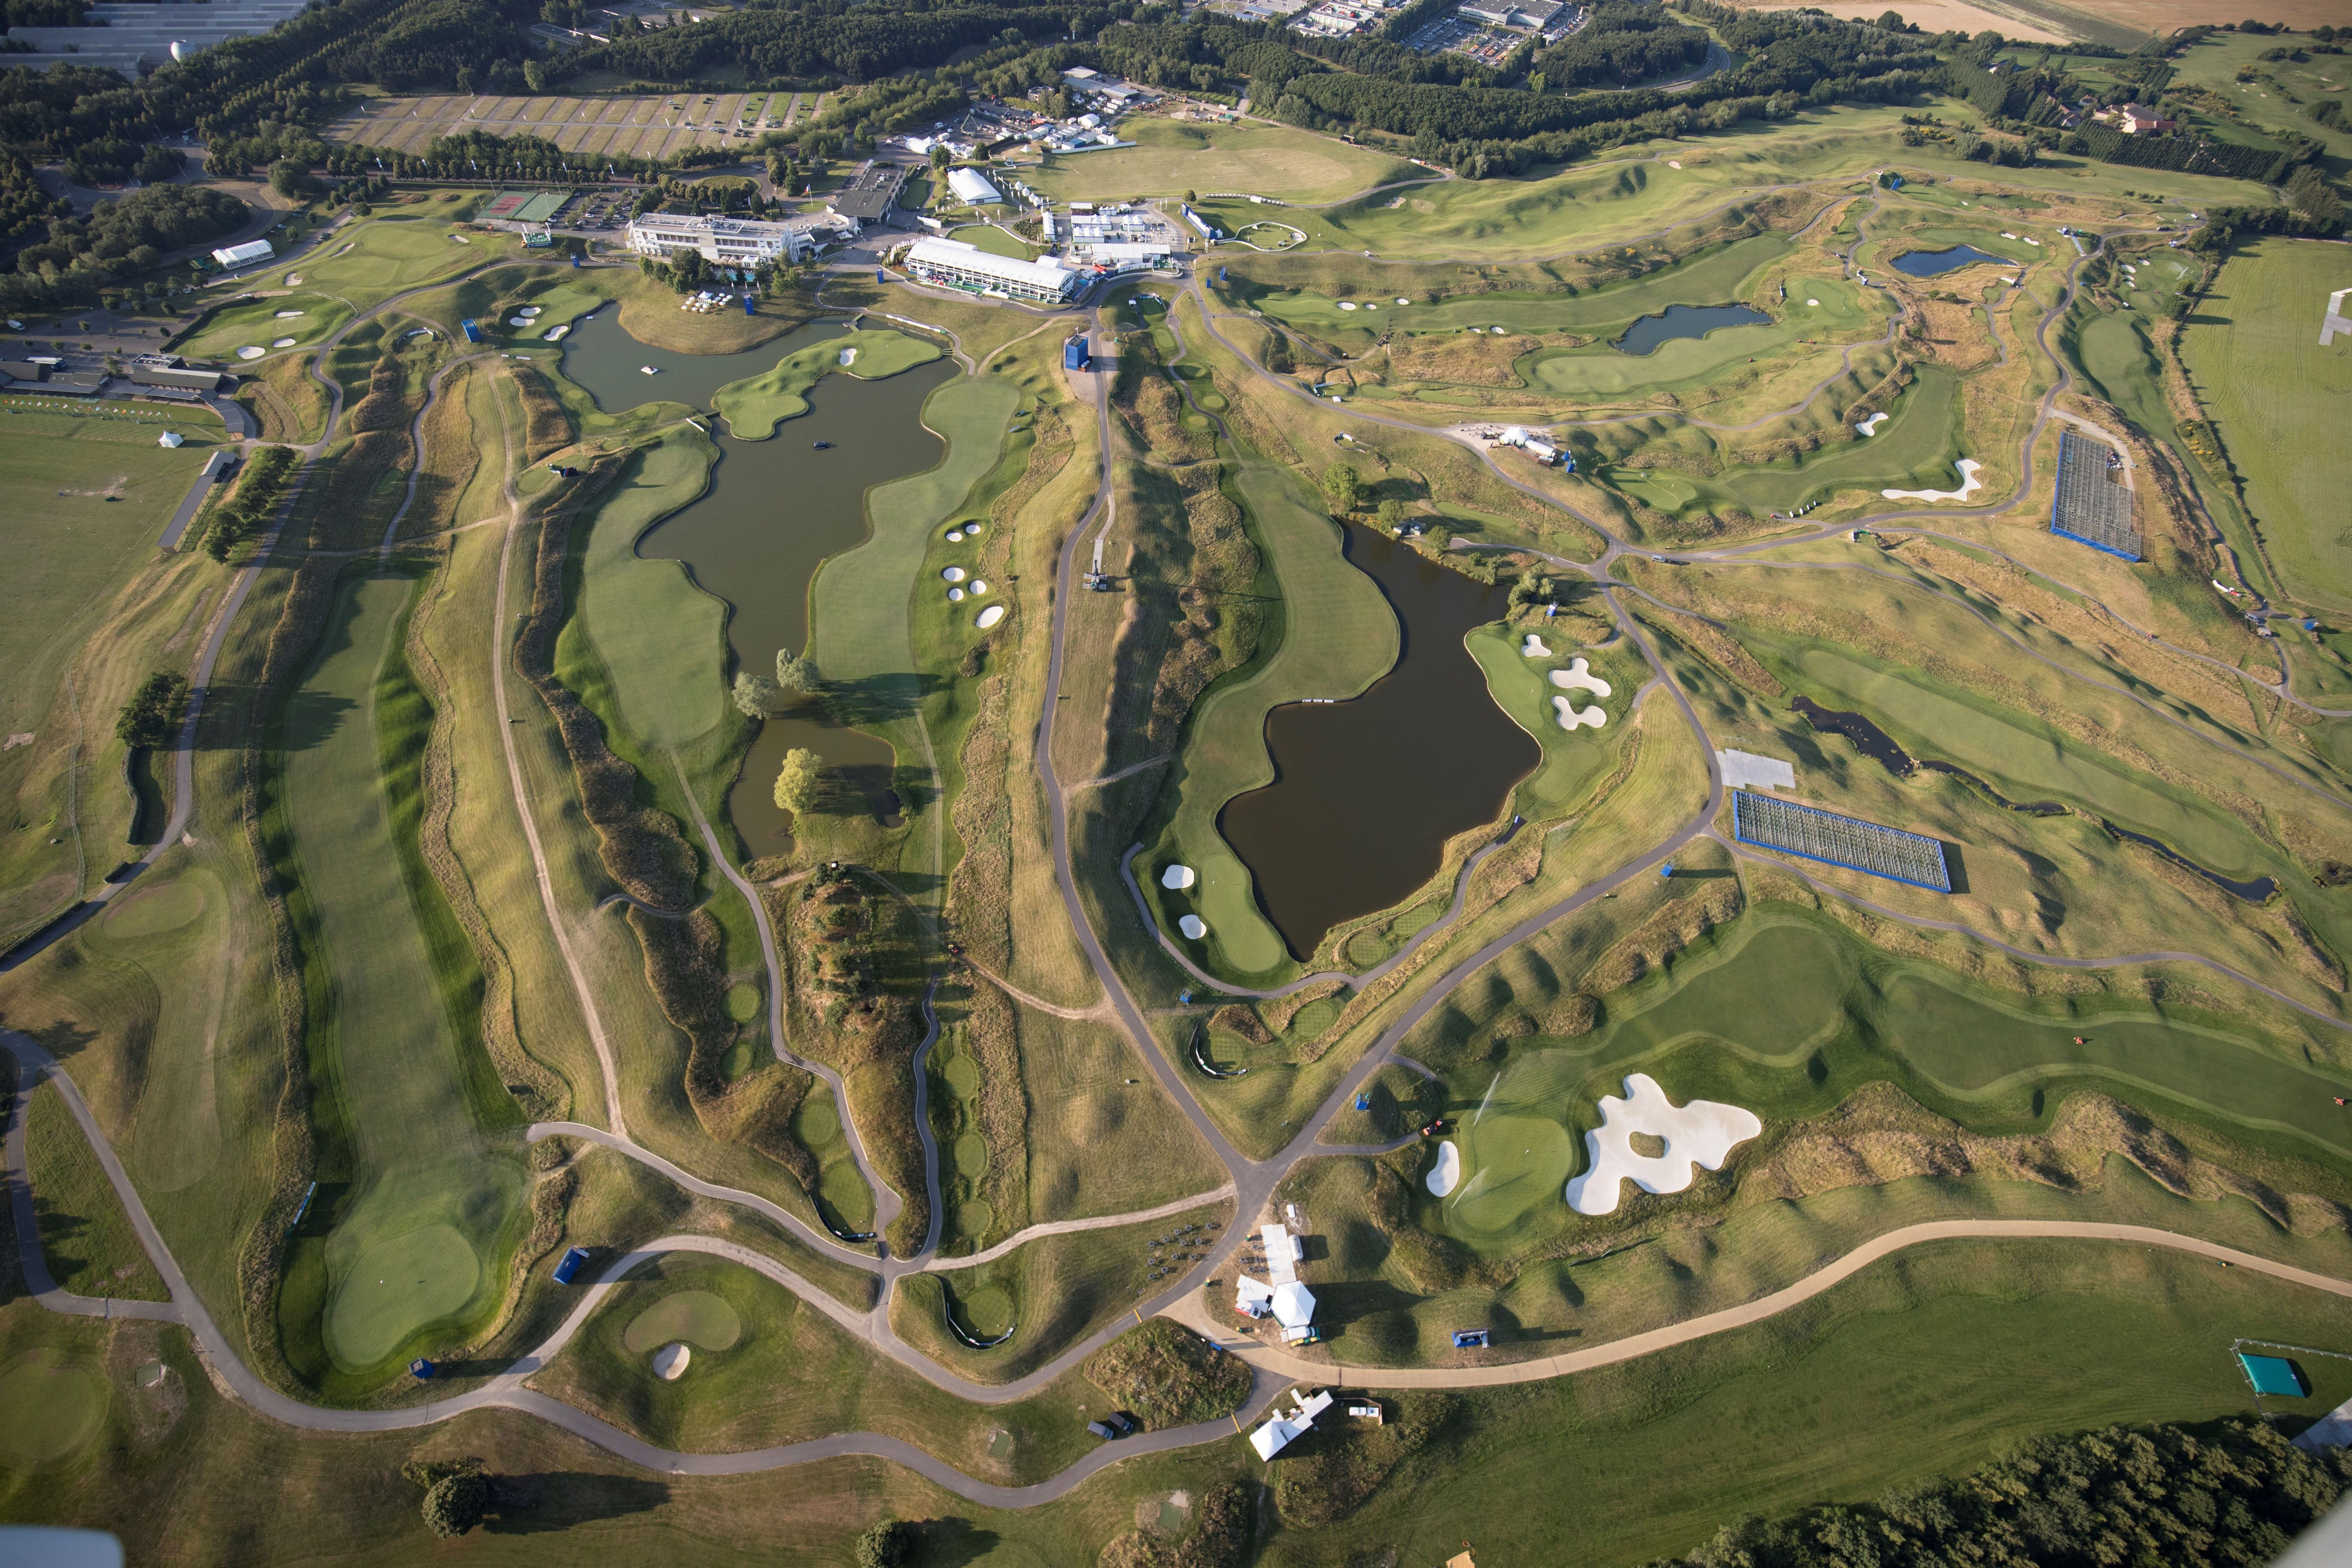 Le Golf National - All You Need to Know BEFORE You Go (with Photos)